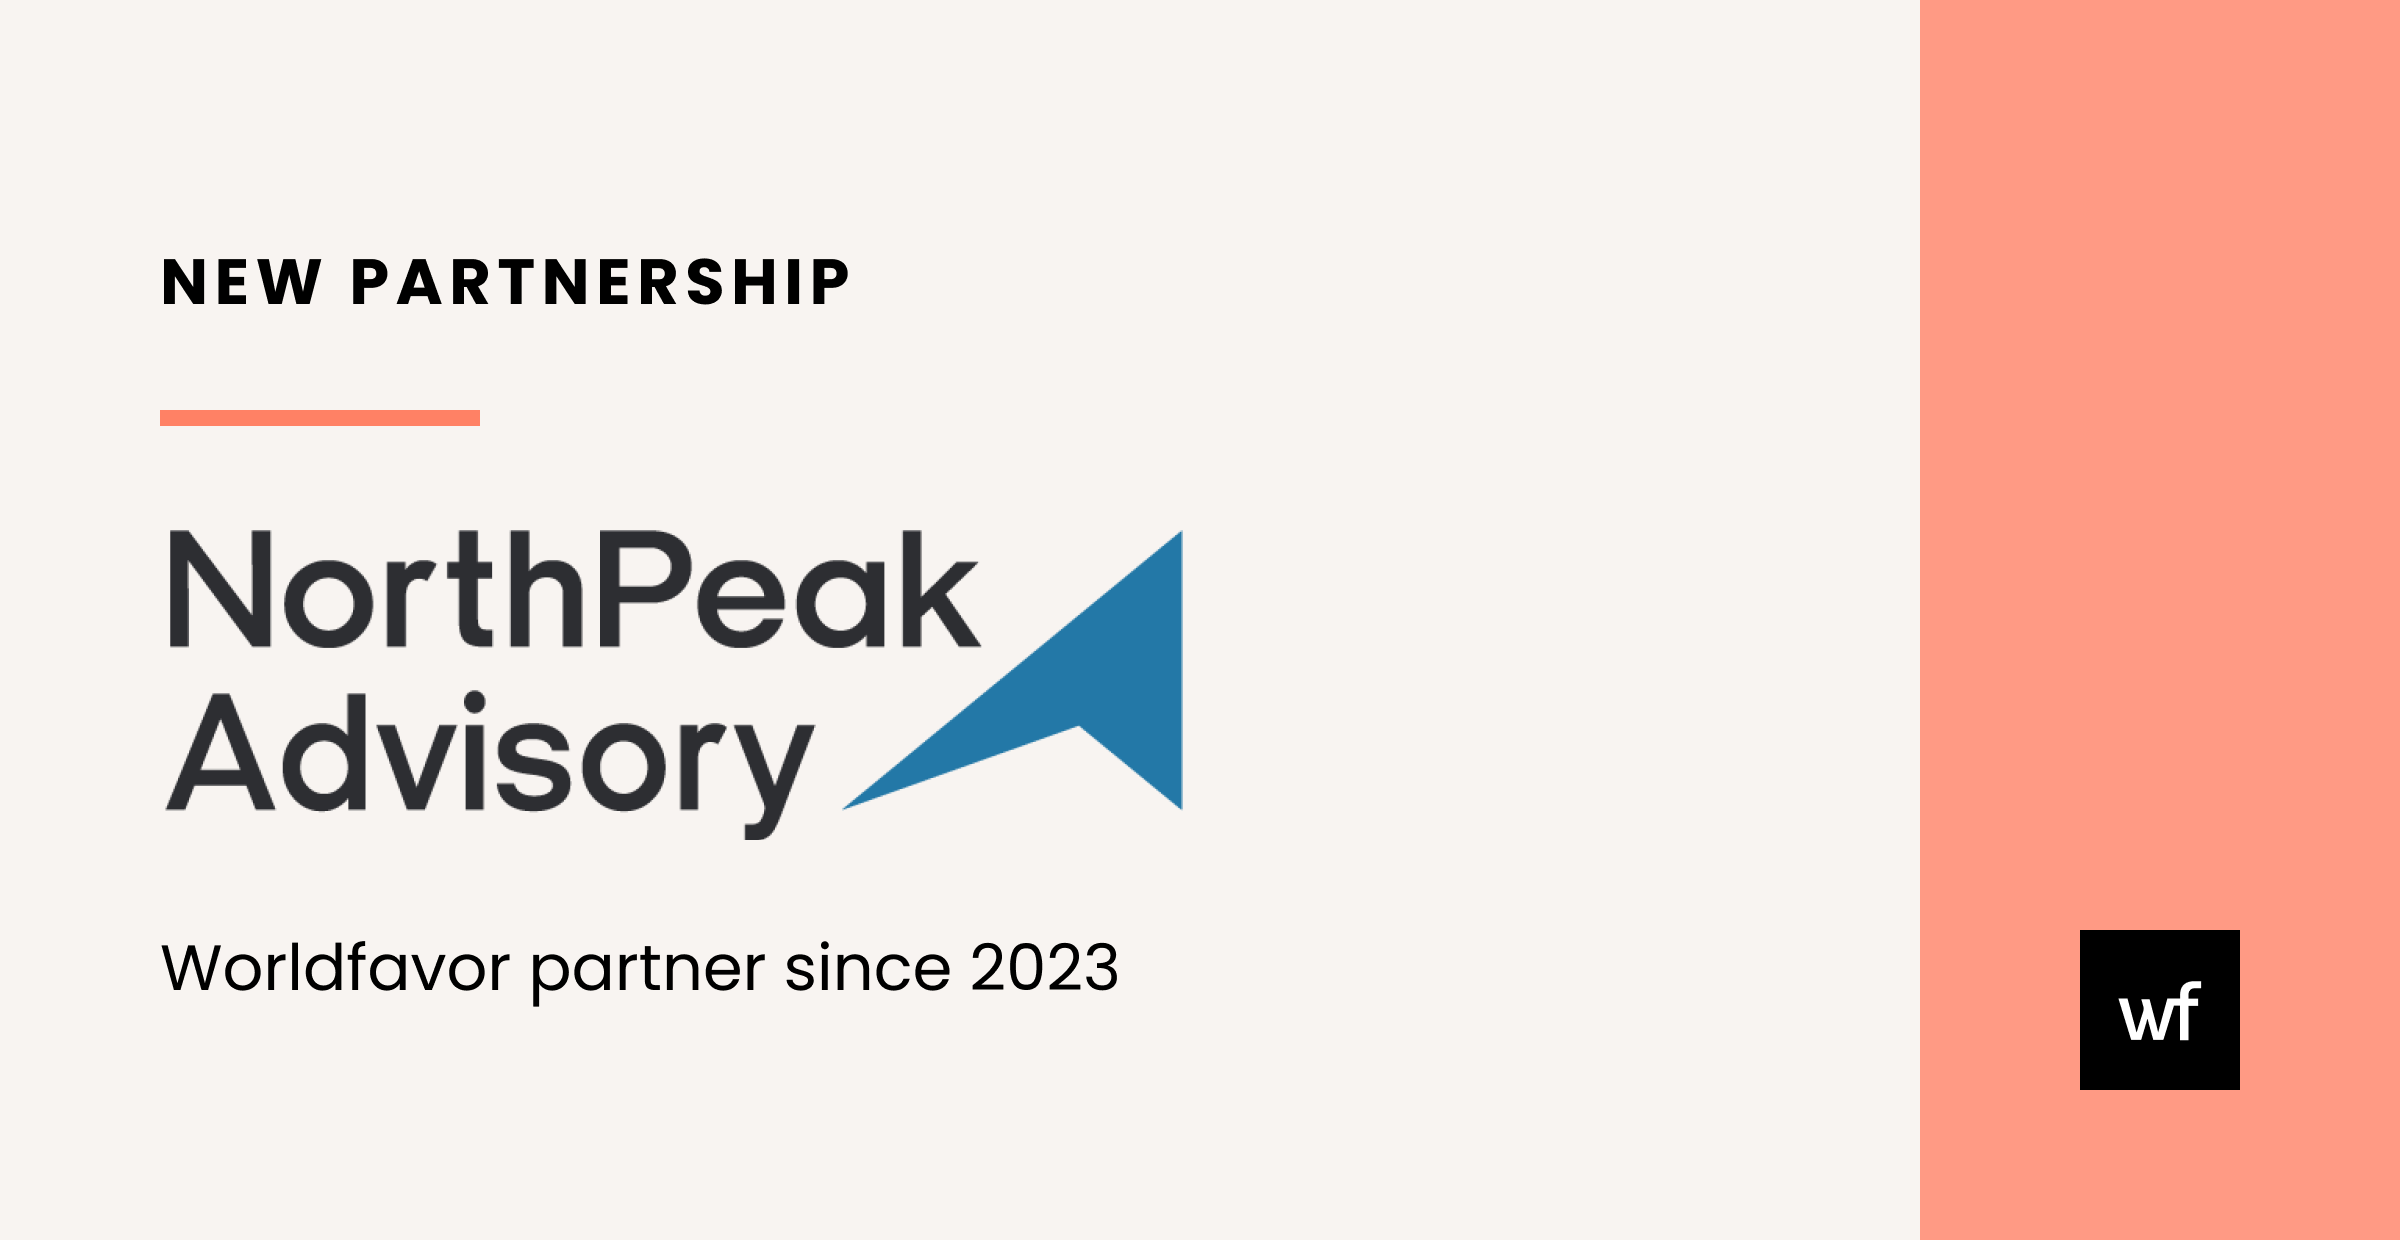 Worldfavor is forming a partnership with NorthPeak Advisory